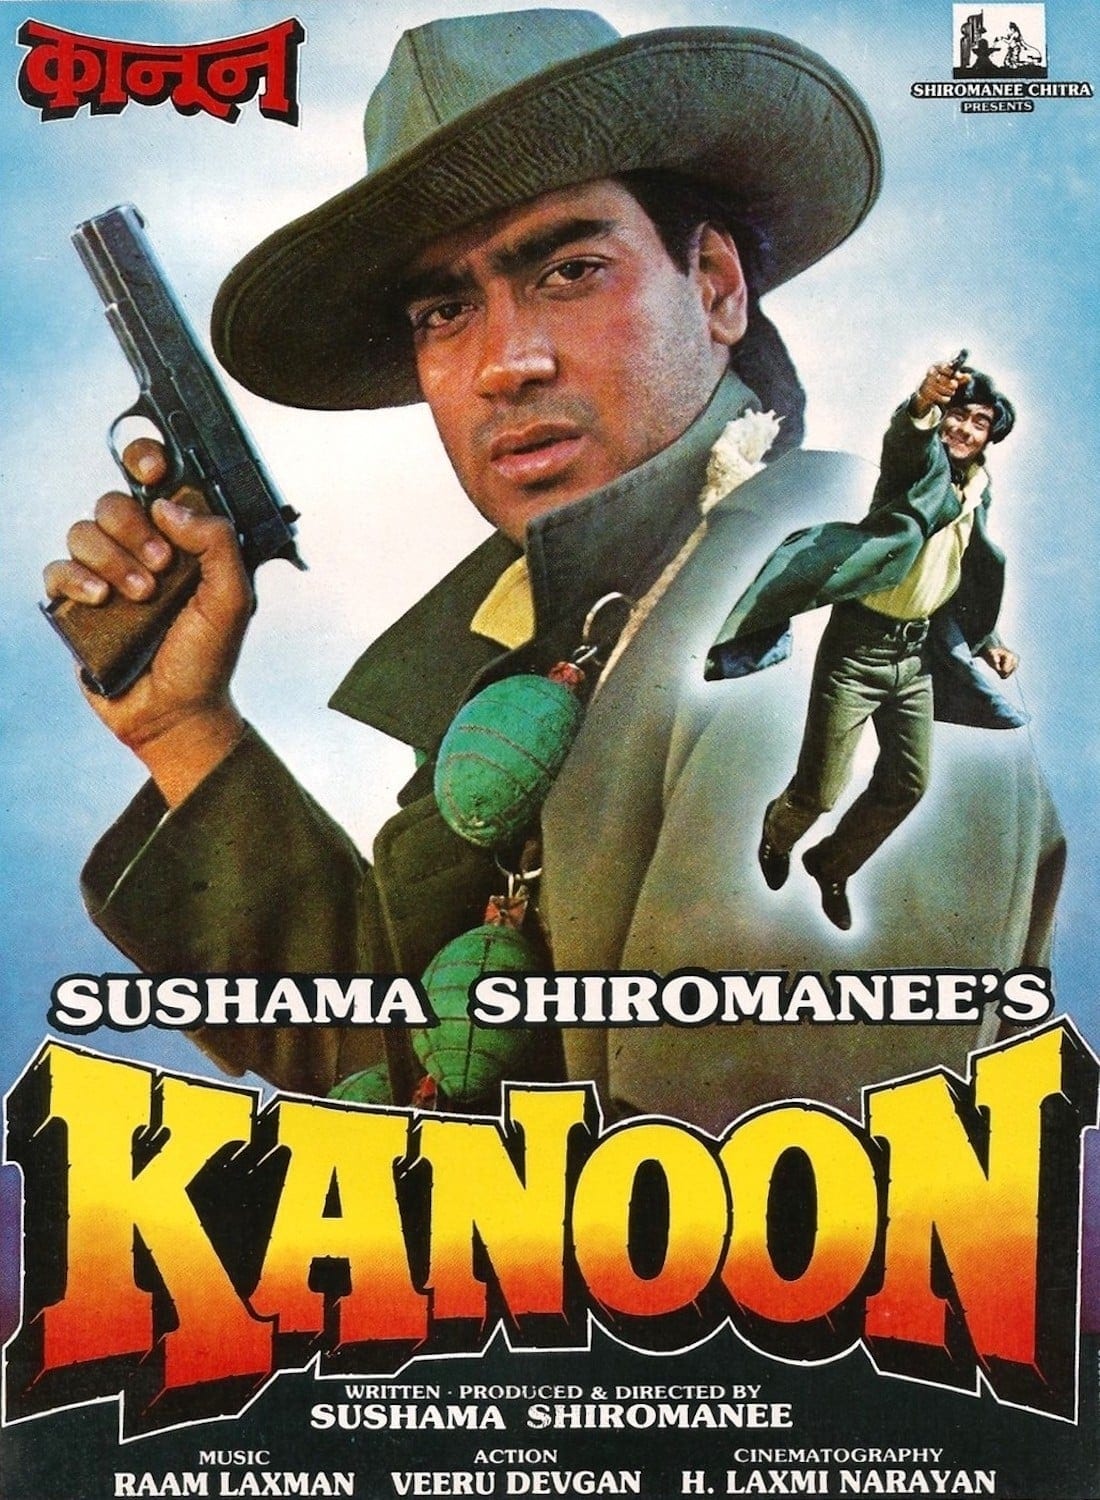 Poster for the movie "Kanoon"